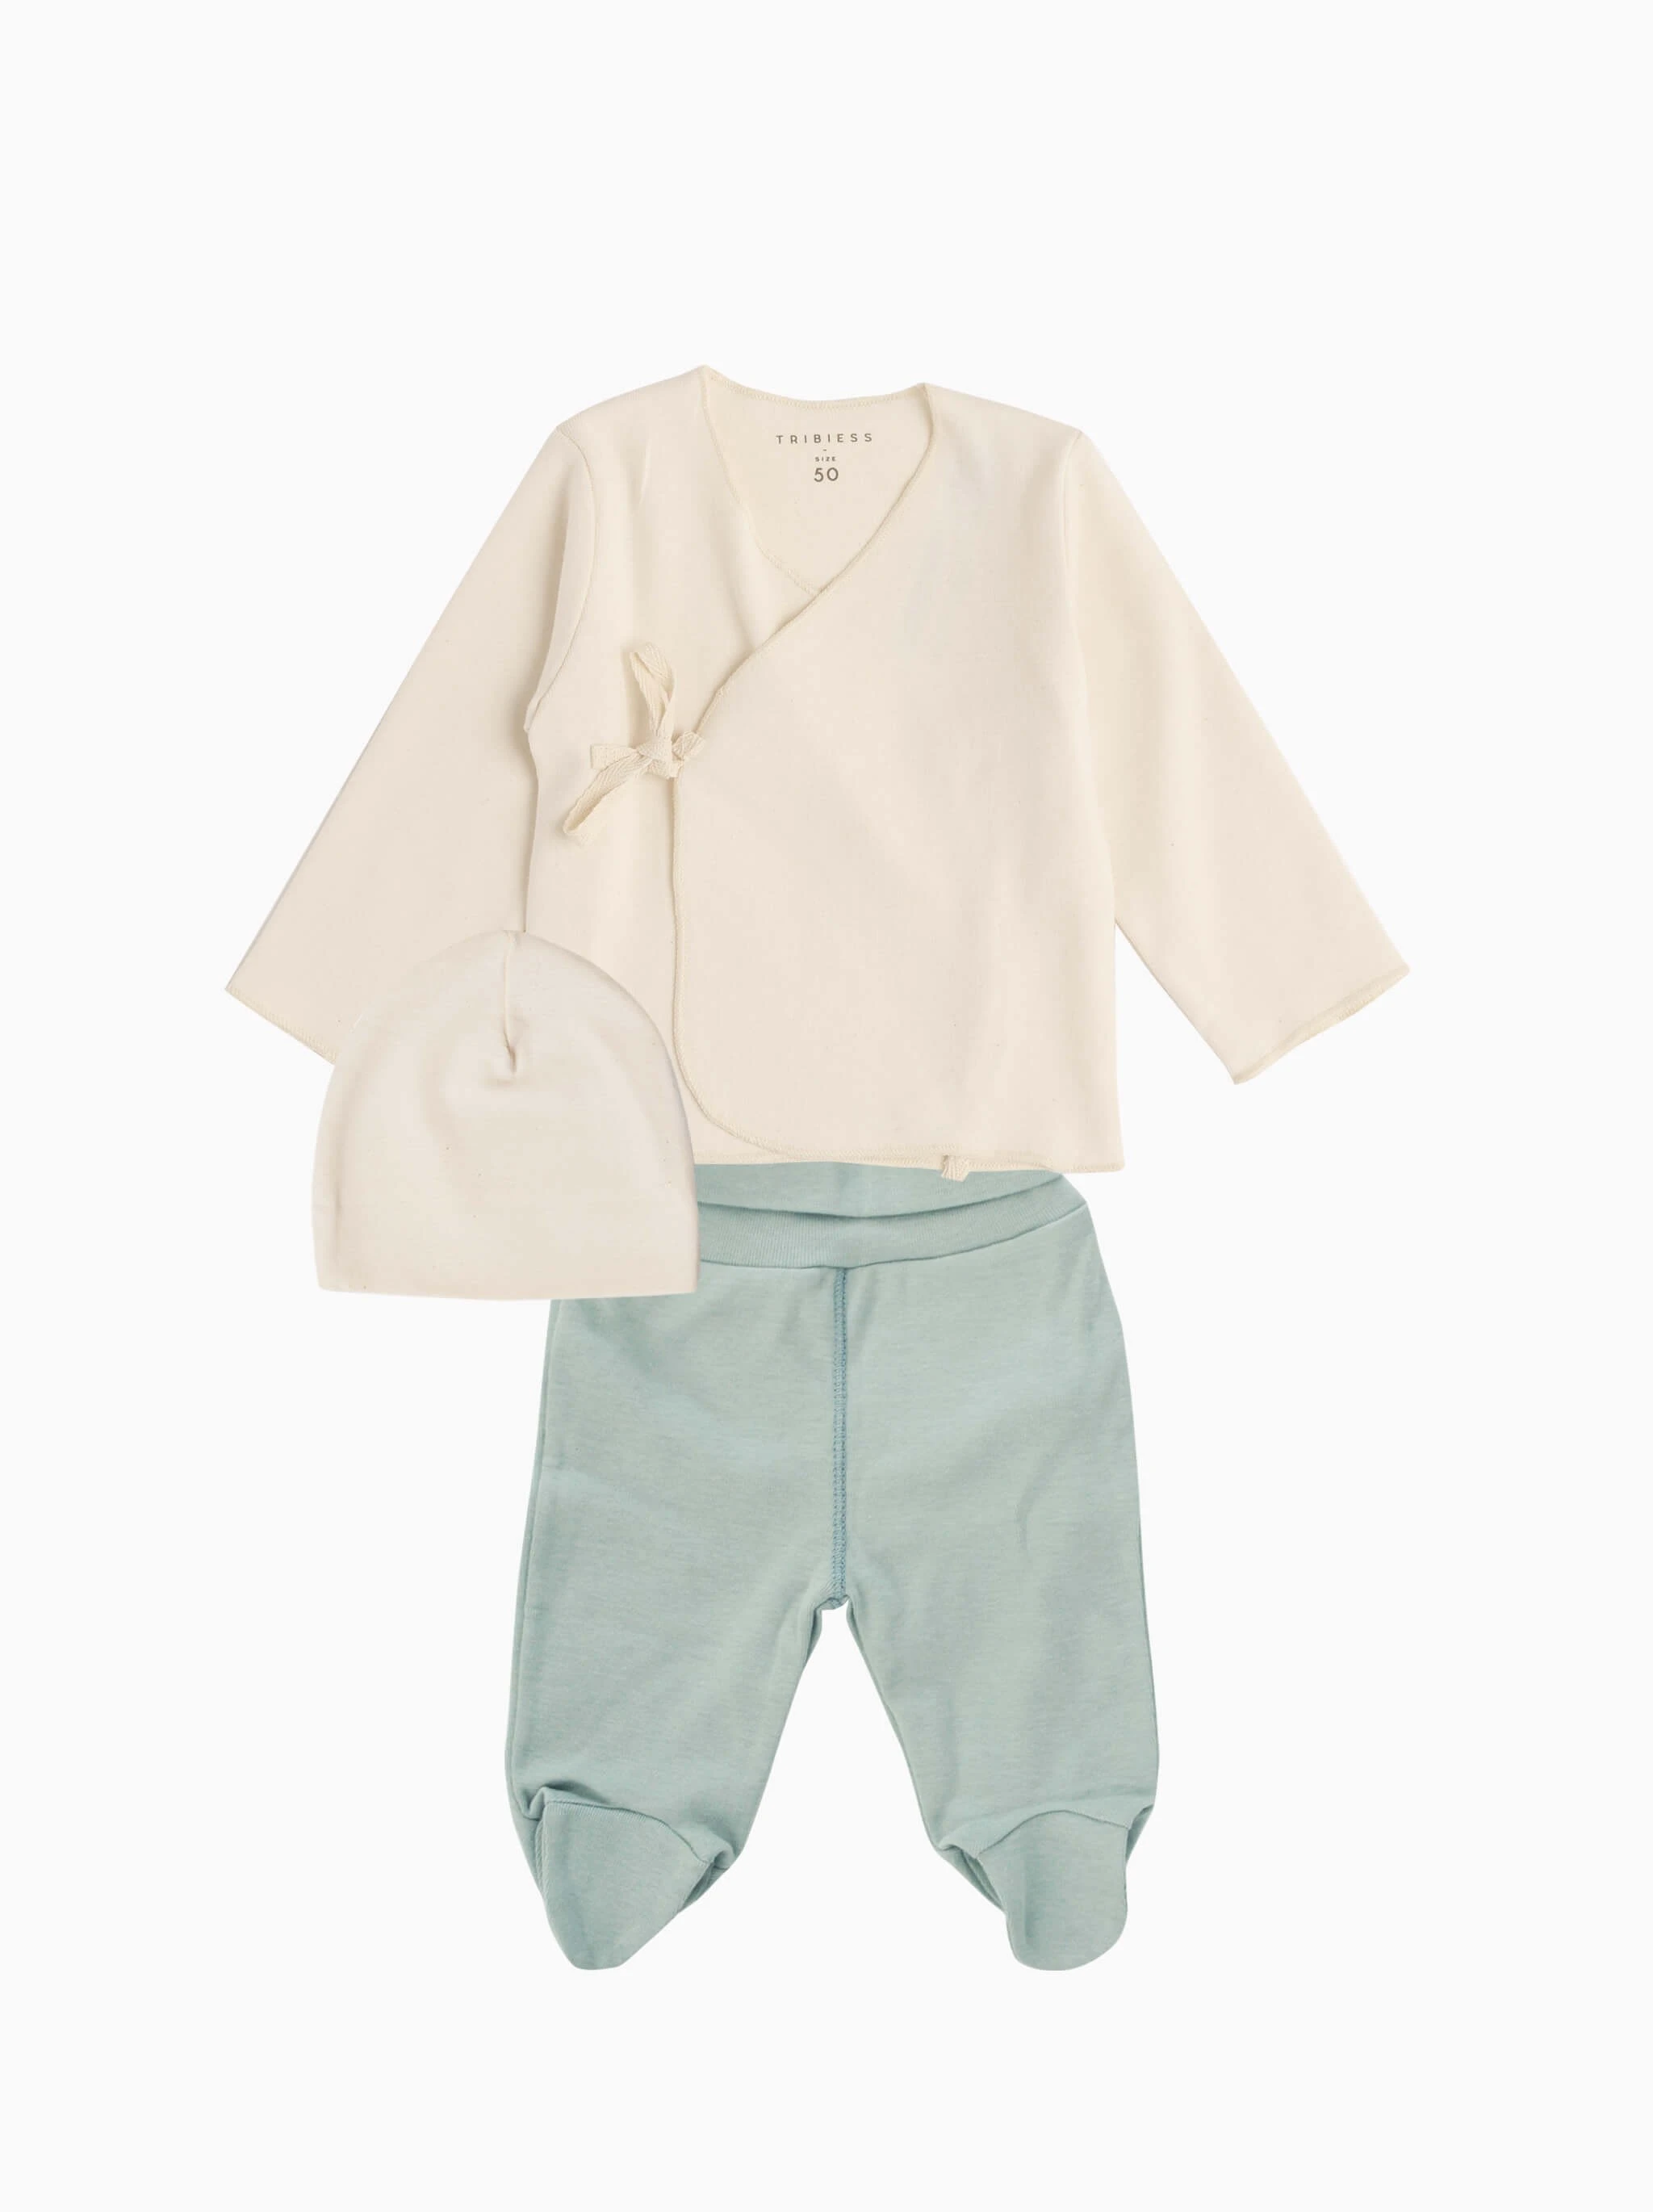 newborn first outfit · unbleached, greensurf